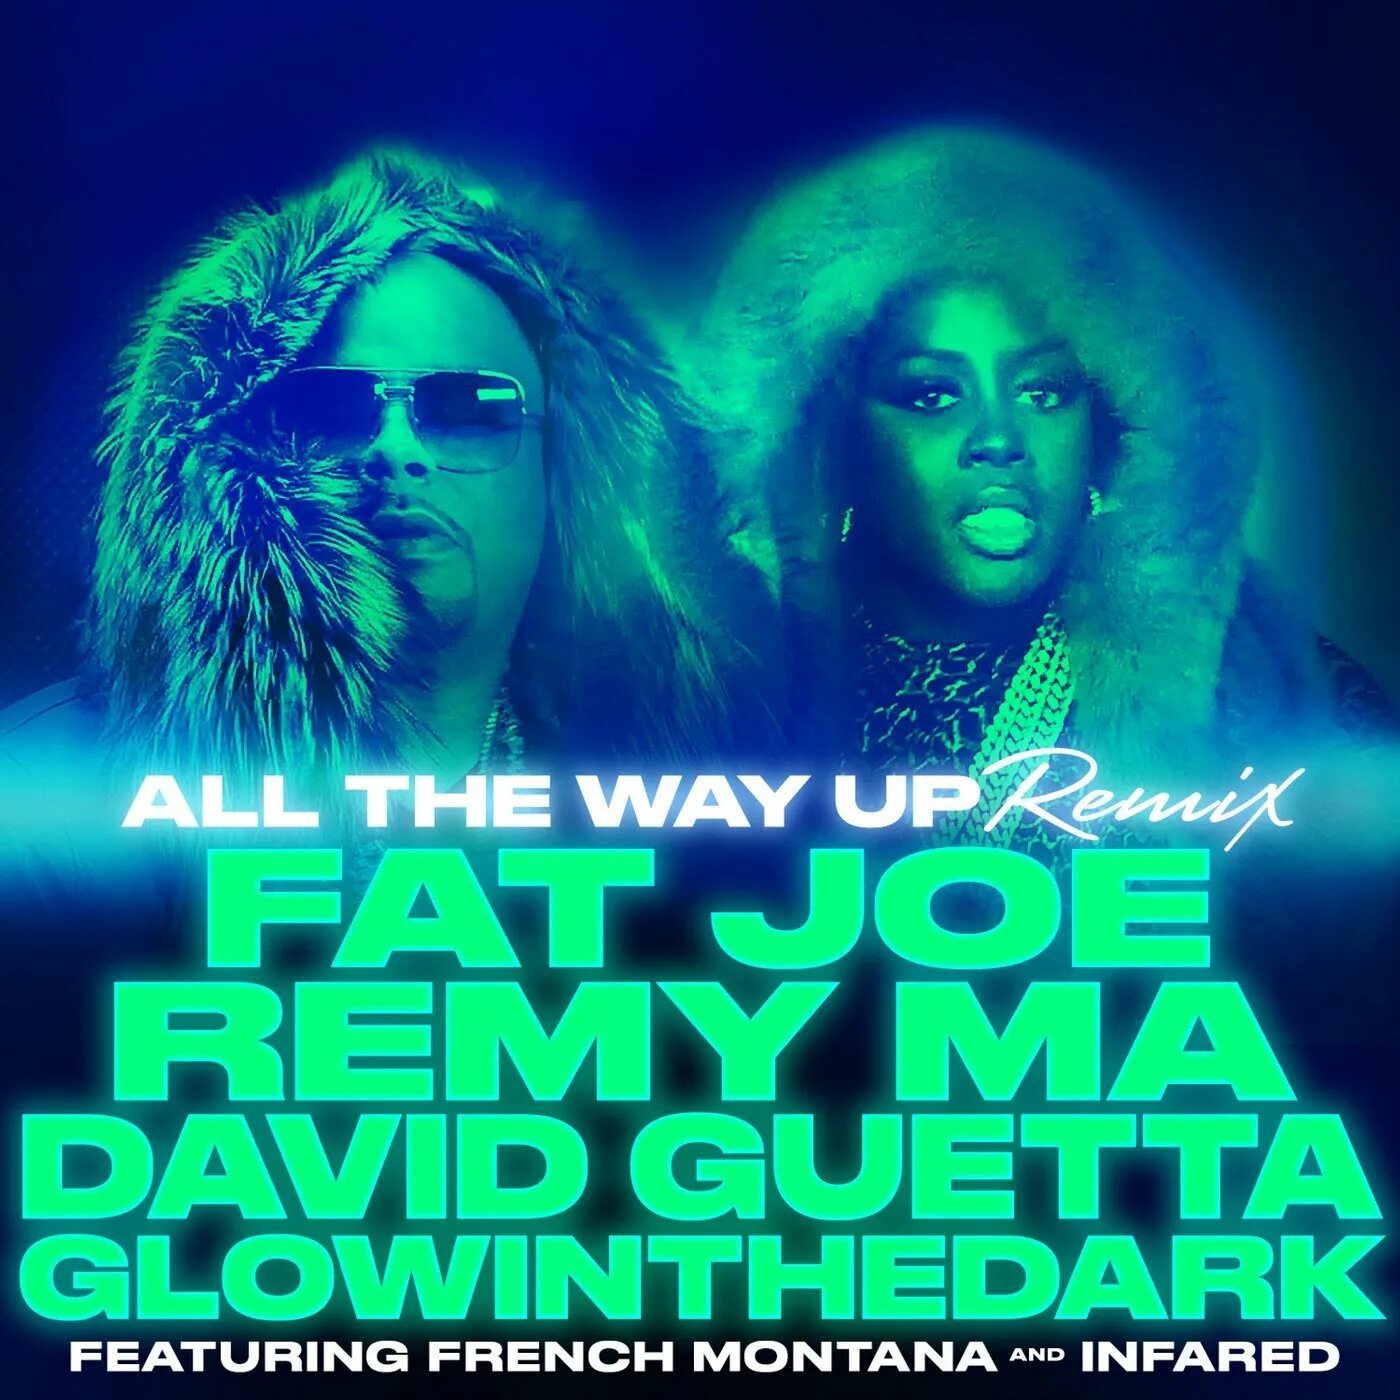 All the way up. All the way up Remix. Fat Joe Remy ma. Обложка all the way up.